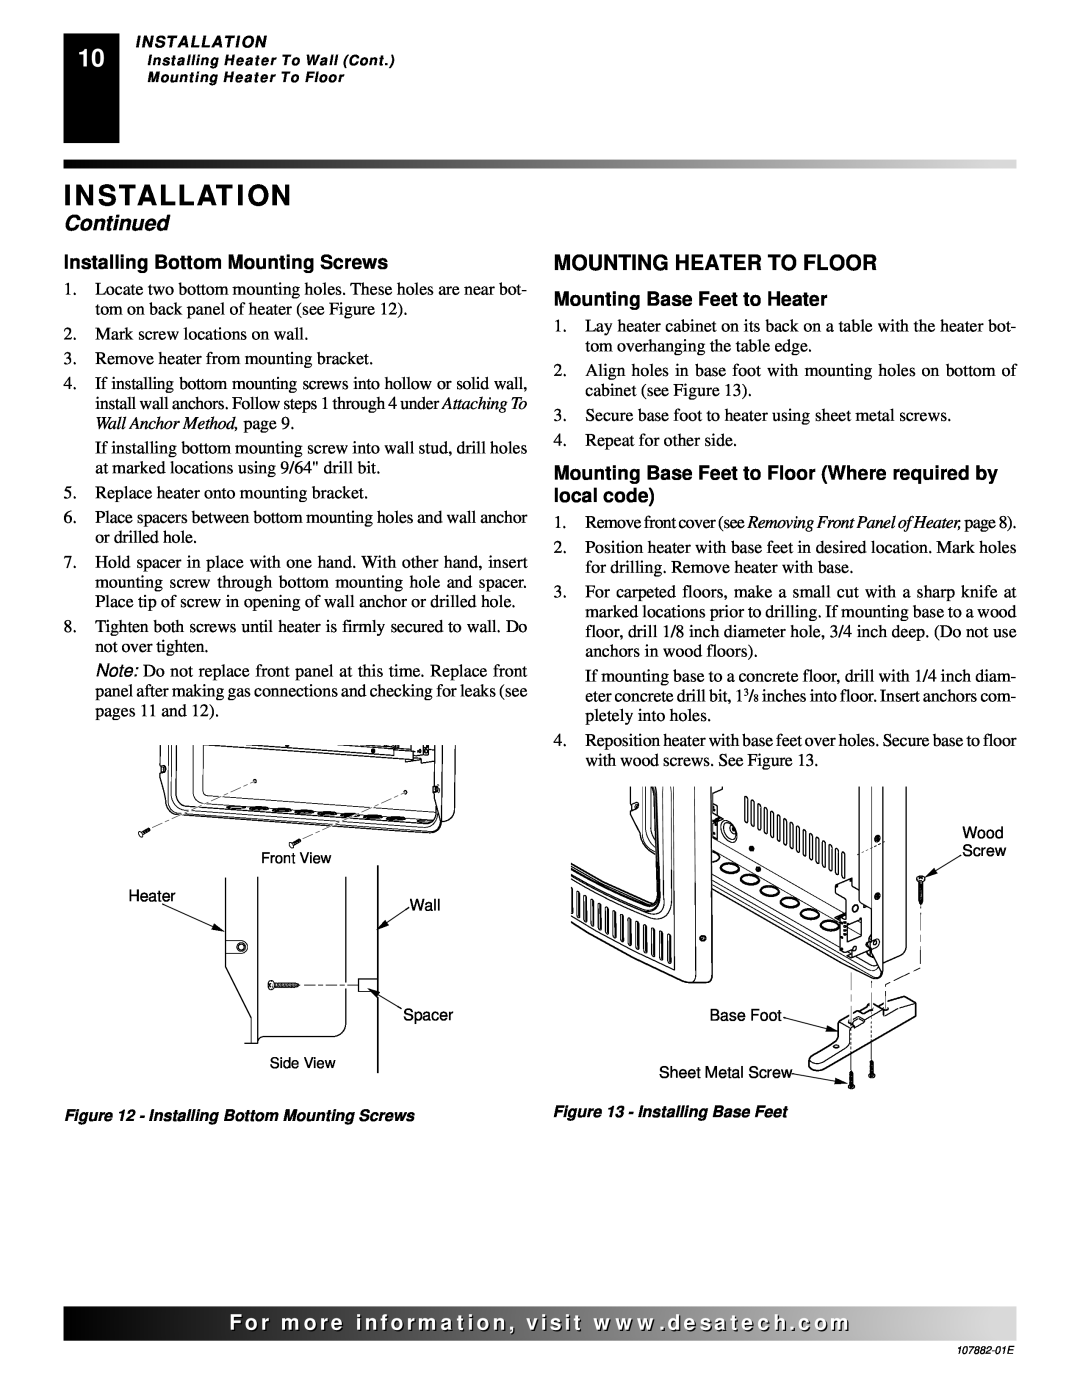 Desa Tech CBN20, CBP20 Installation, Continued, For..com, Installing Bottom Mounting Screws, Mounting Base Feet to Heater 